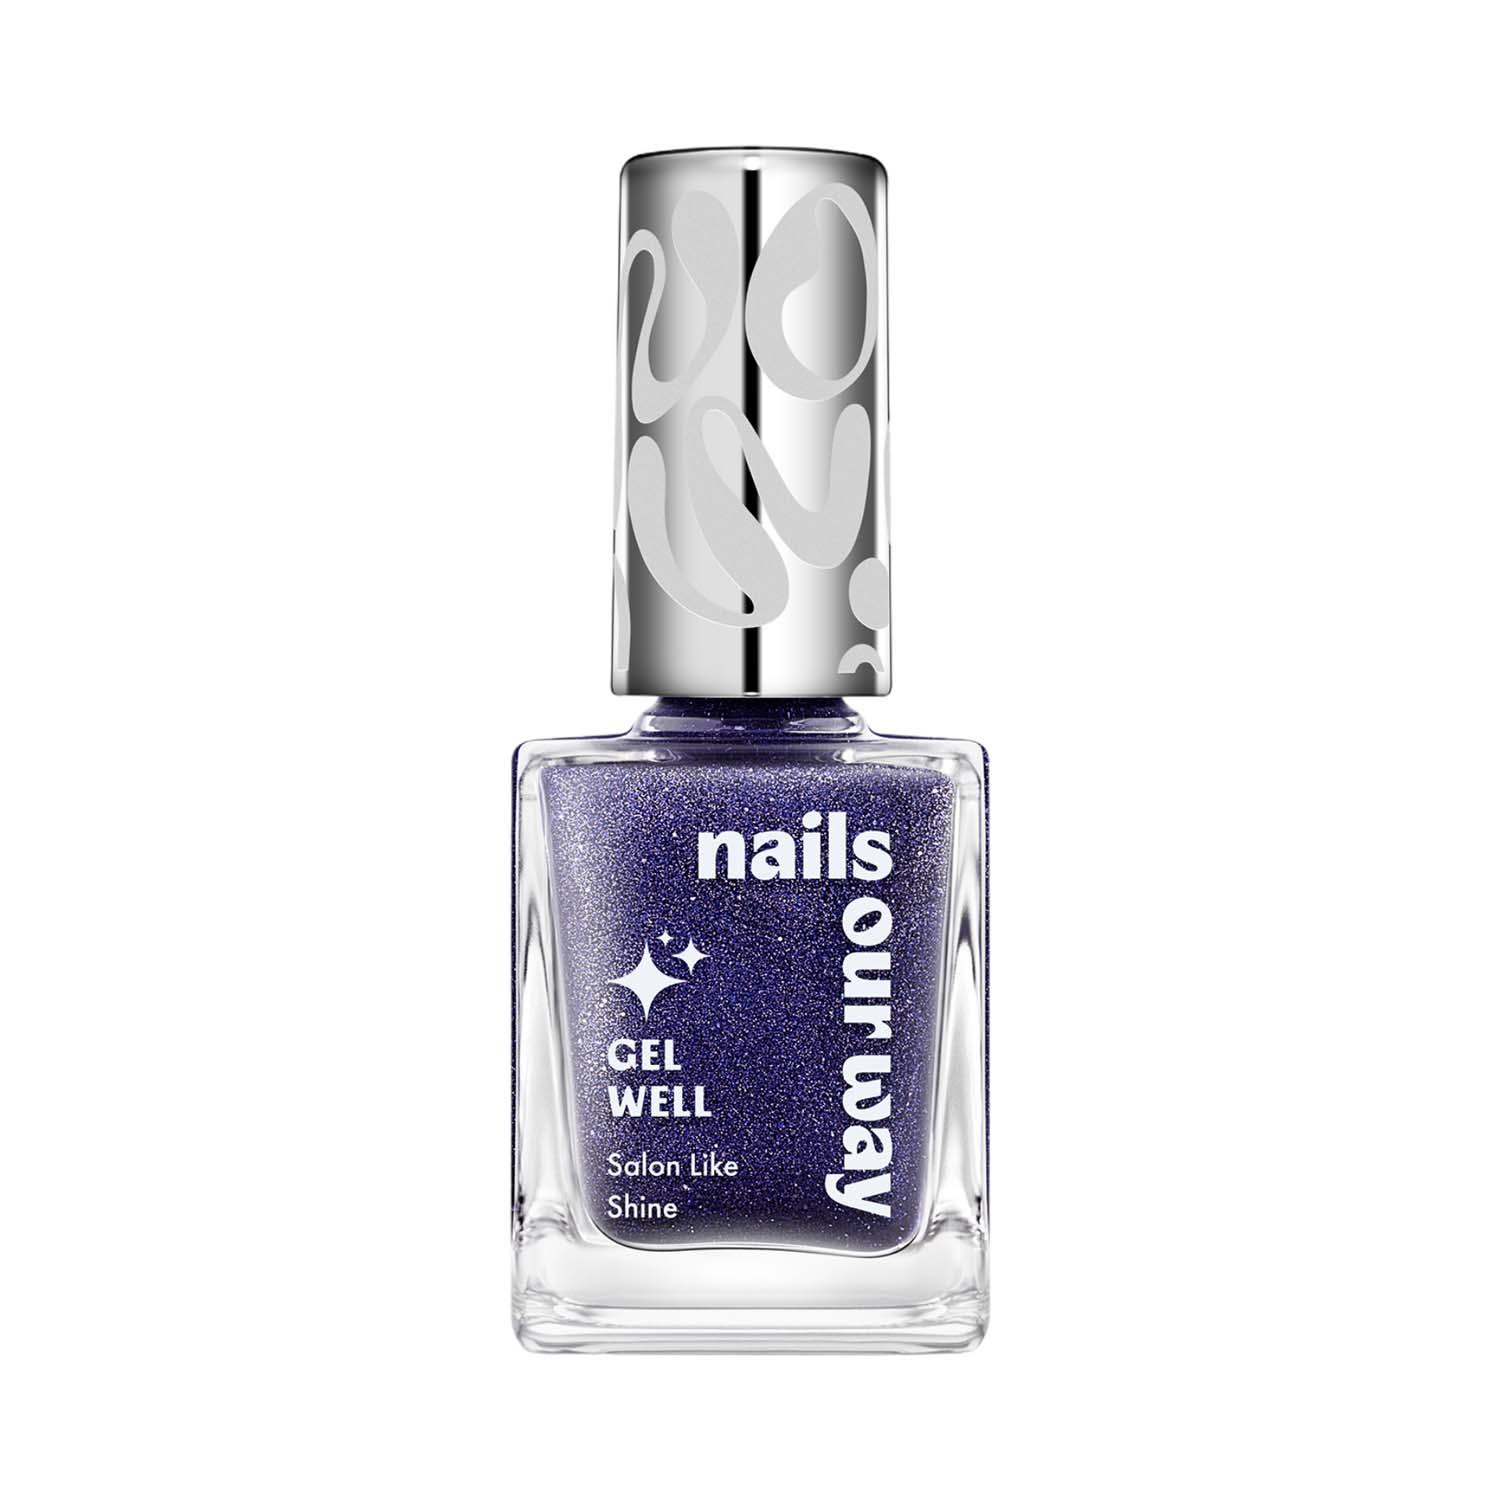 Nails Our Way | Nails Our Way Gel Well Nail Enamel - 220 Dreamer (10 ml)